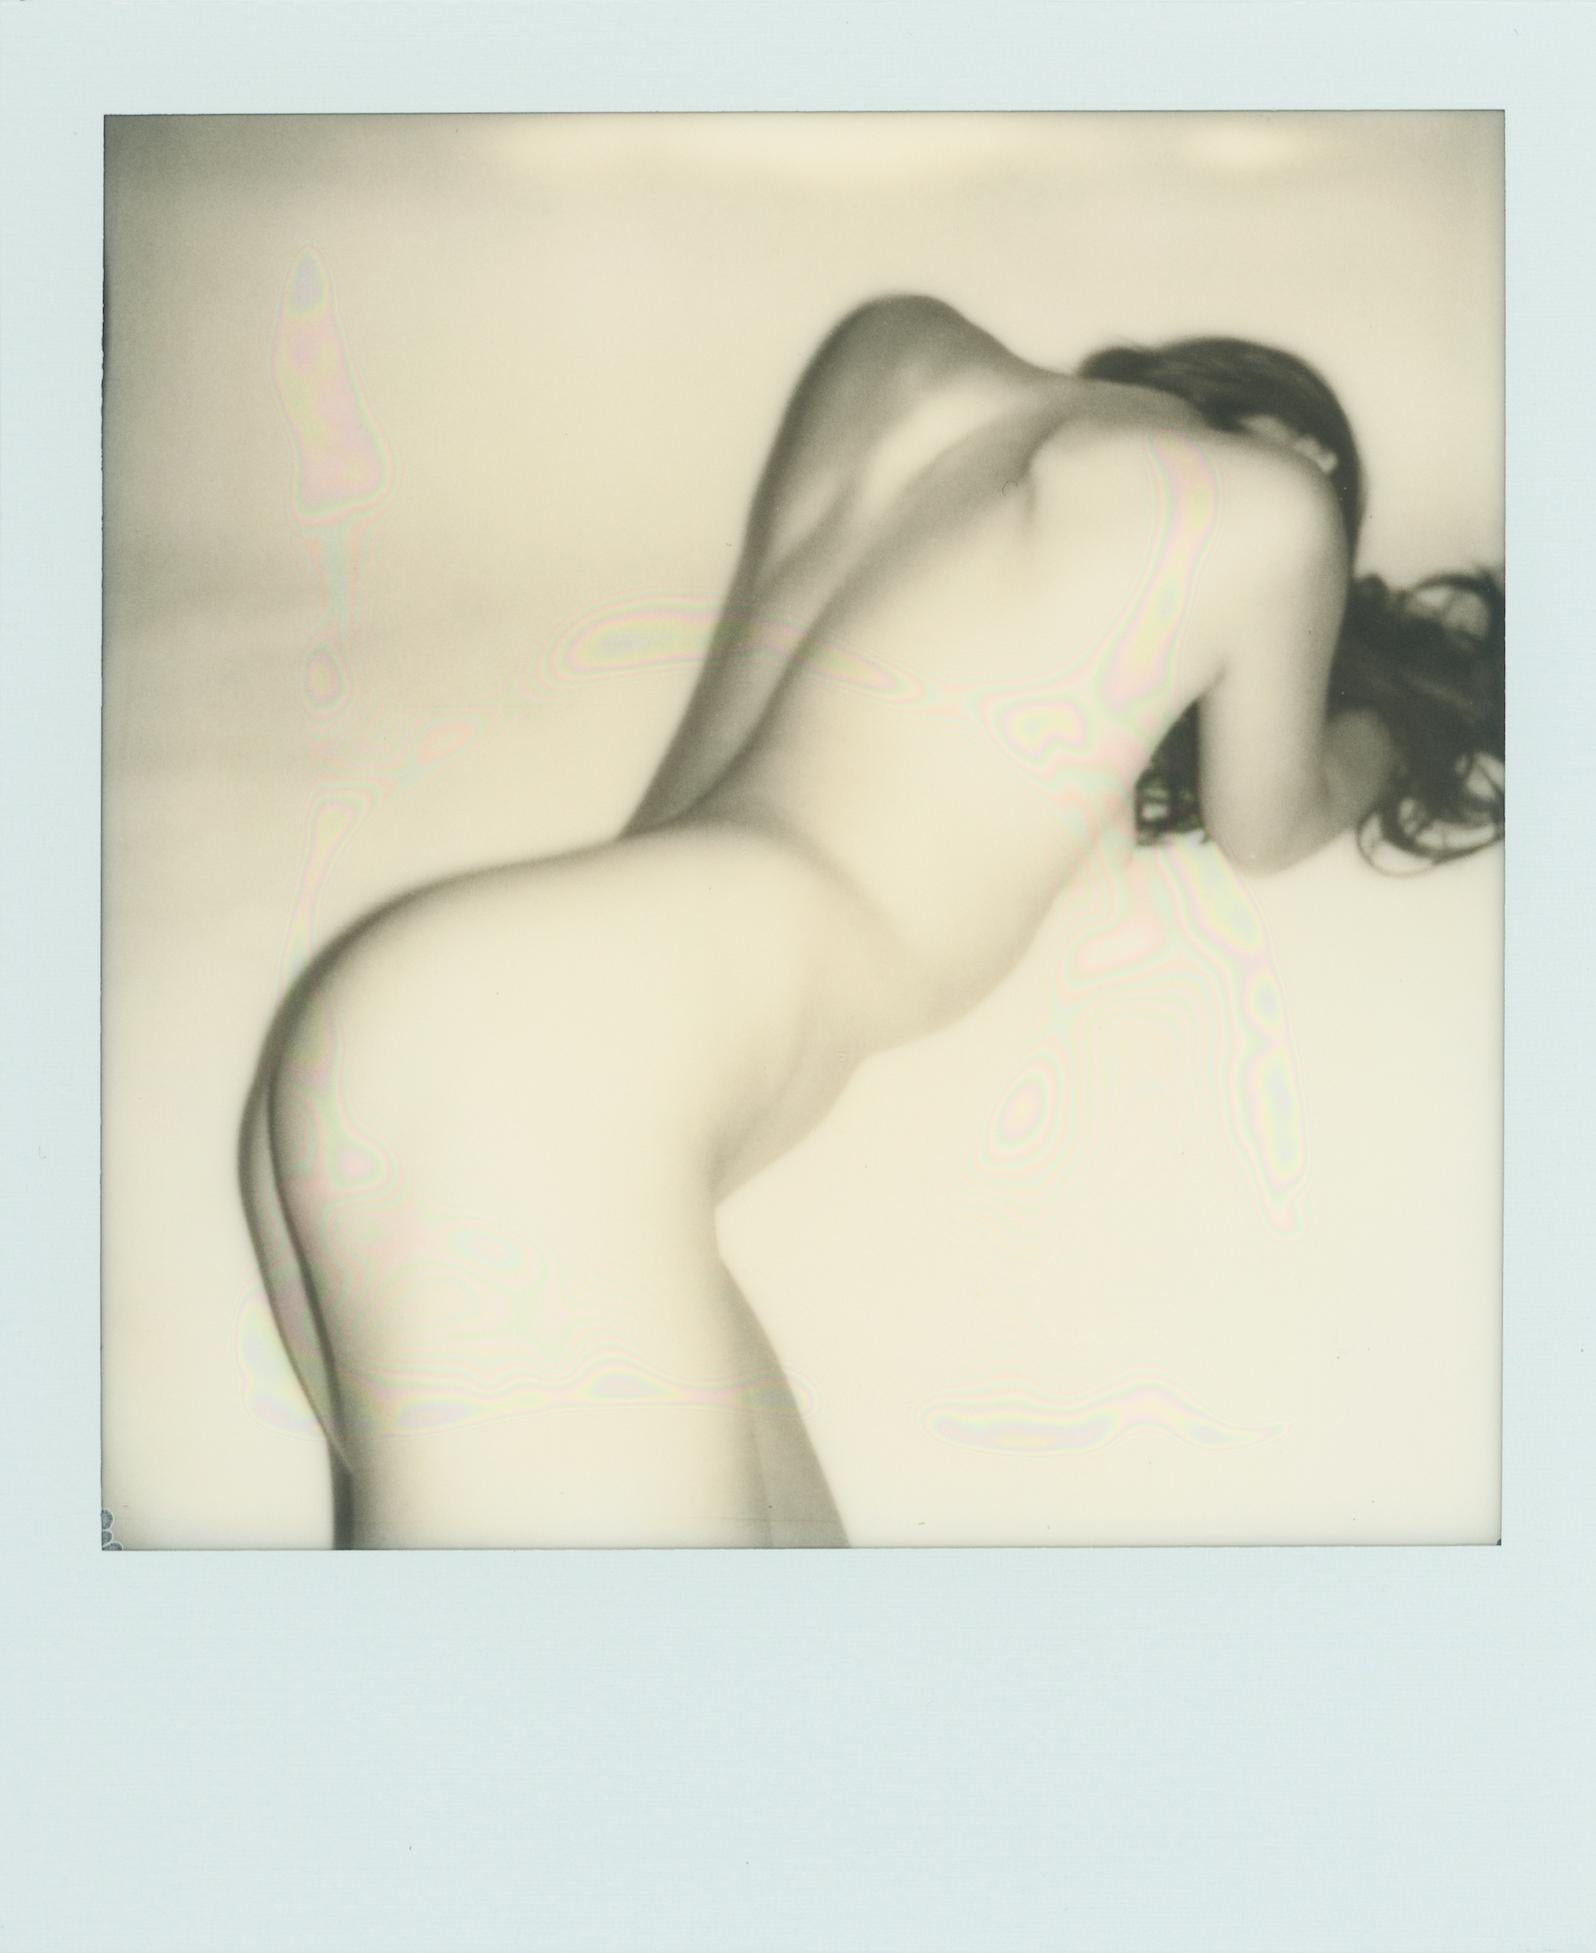 "Pola Girls 16" Original Polaroid / Unique piece by Larsen Sotelo 

4.2" x 3.5" inch - including white Polaroid frame
3.1" x 3,1" inch - image area

Comes with Acrylonitrile butadiene styrene (ABS) plastic frame

Numbered and hand signed by the